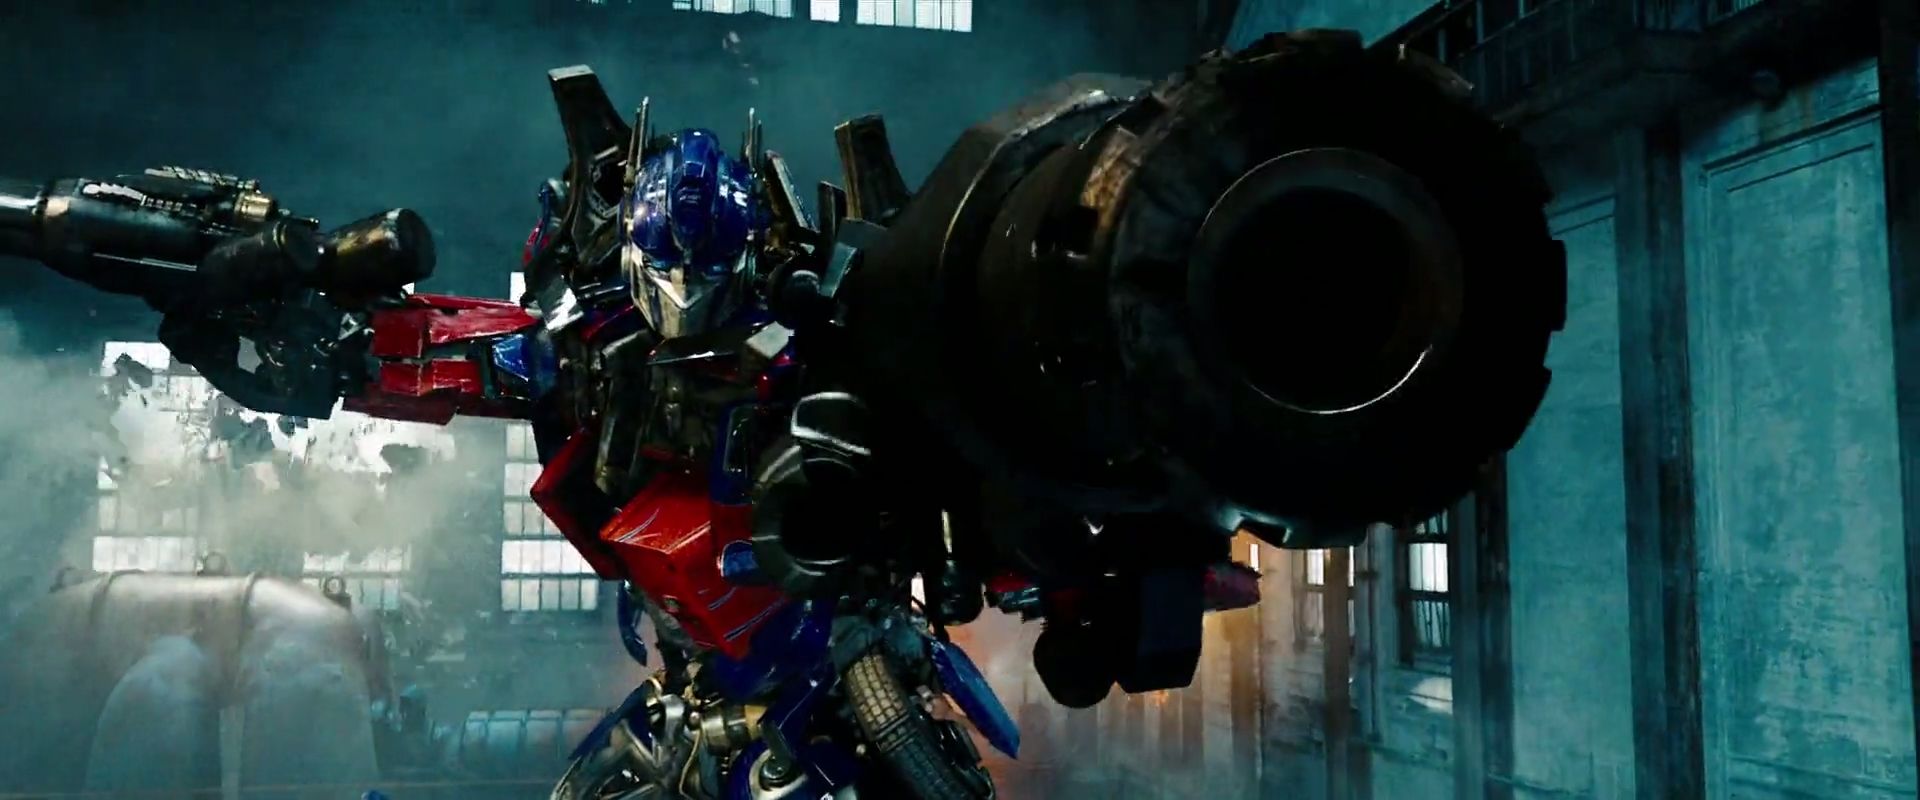 Transformers Live Action Movie Series: The Top Battles